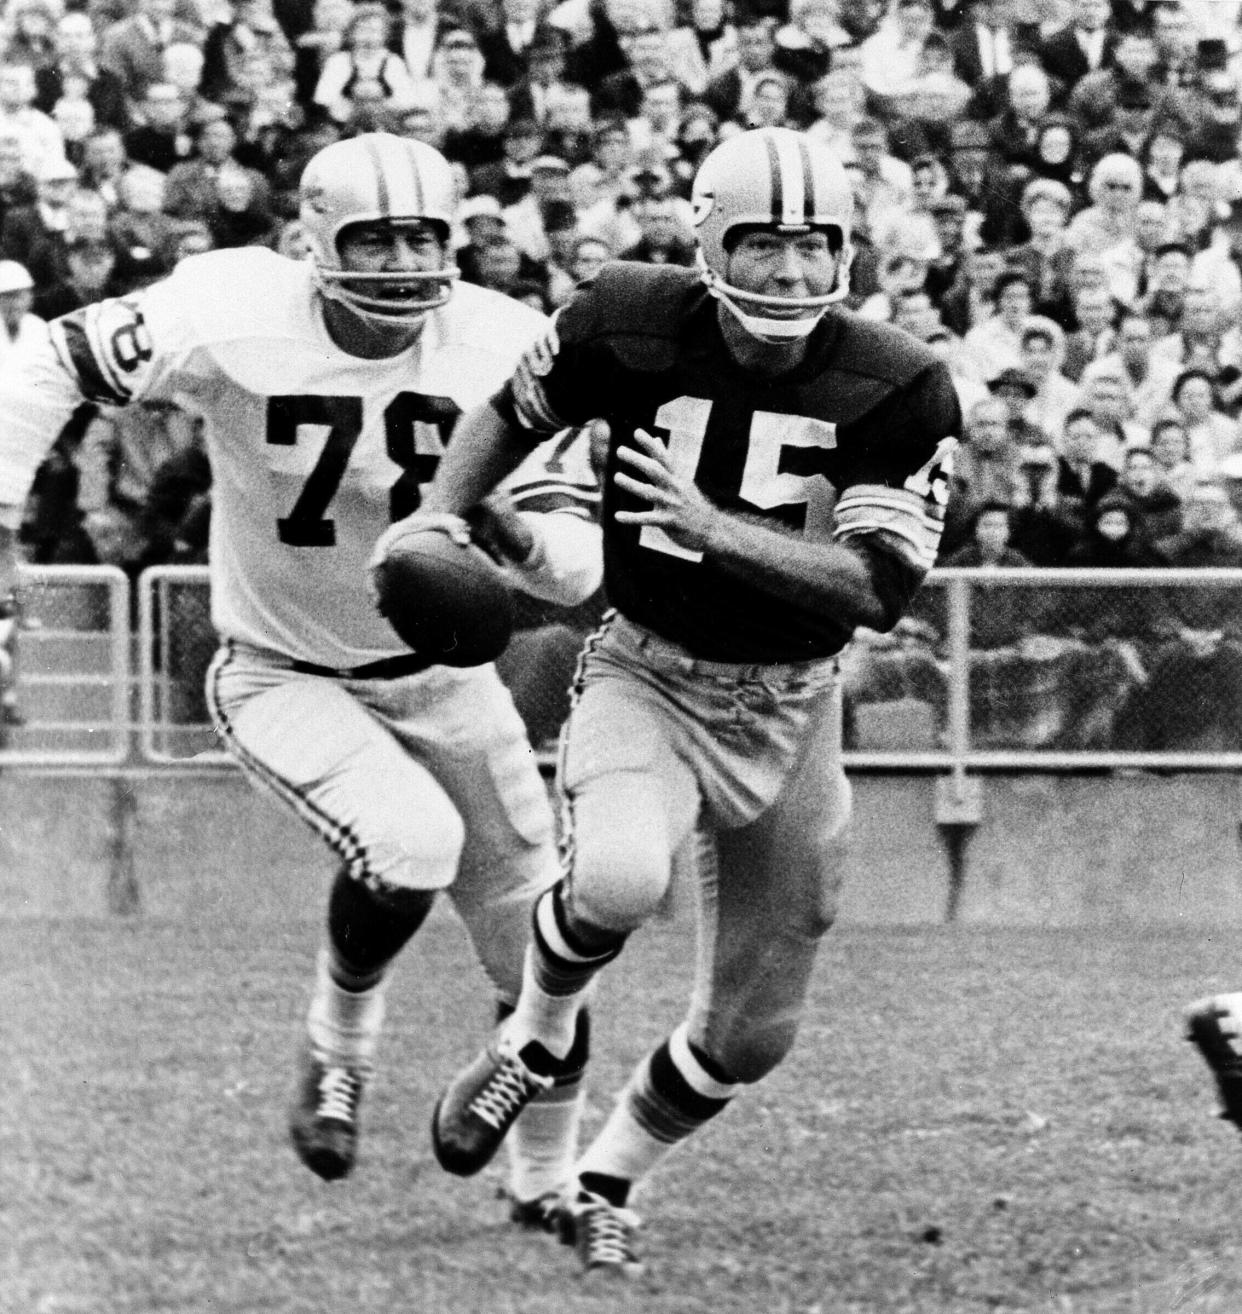 Green Bay Packers quarterback Bart Starr is pursued by Detroit Lions defender Darris McCord during a 1966 game.